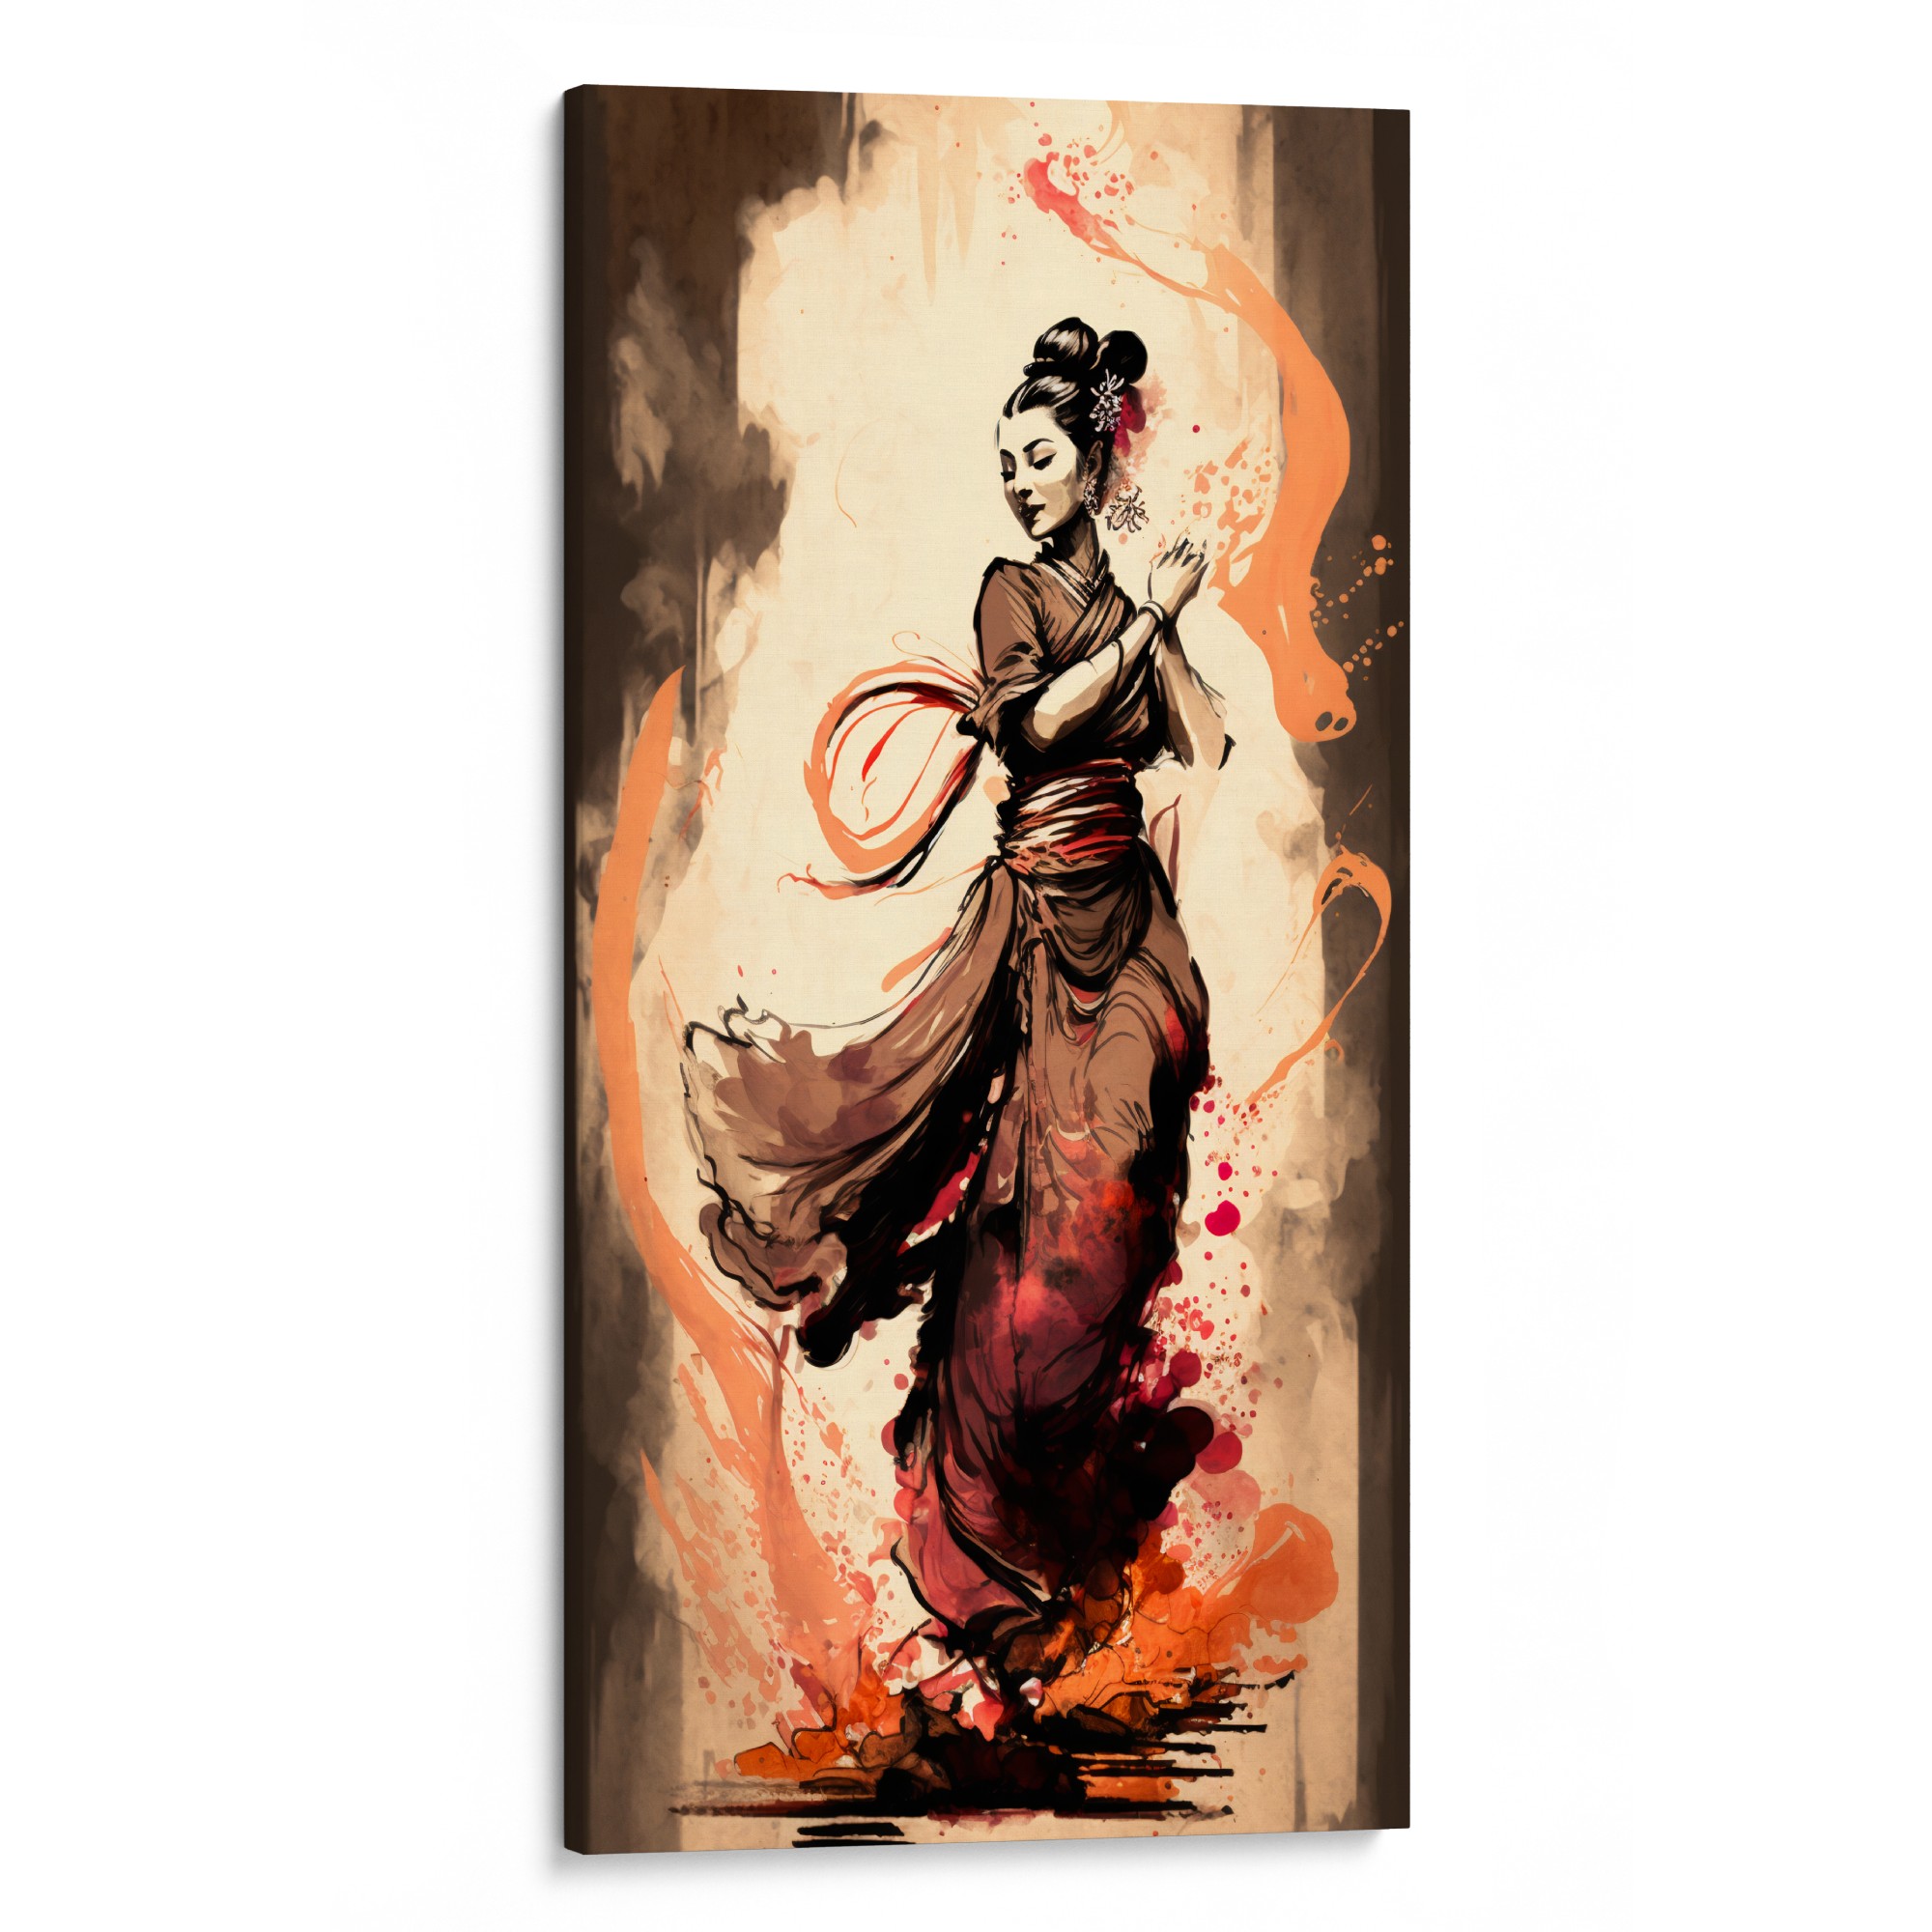 MAE-LIN Original Canvas - Elegance and passion in dance, perfect for art enthusiasts.